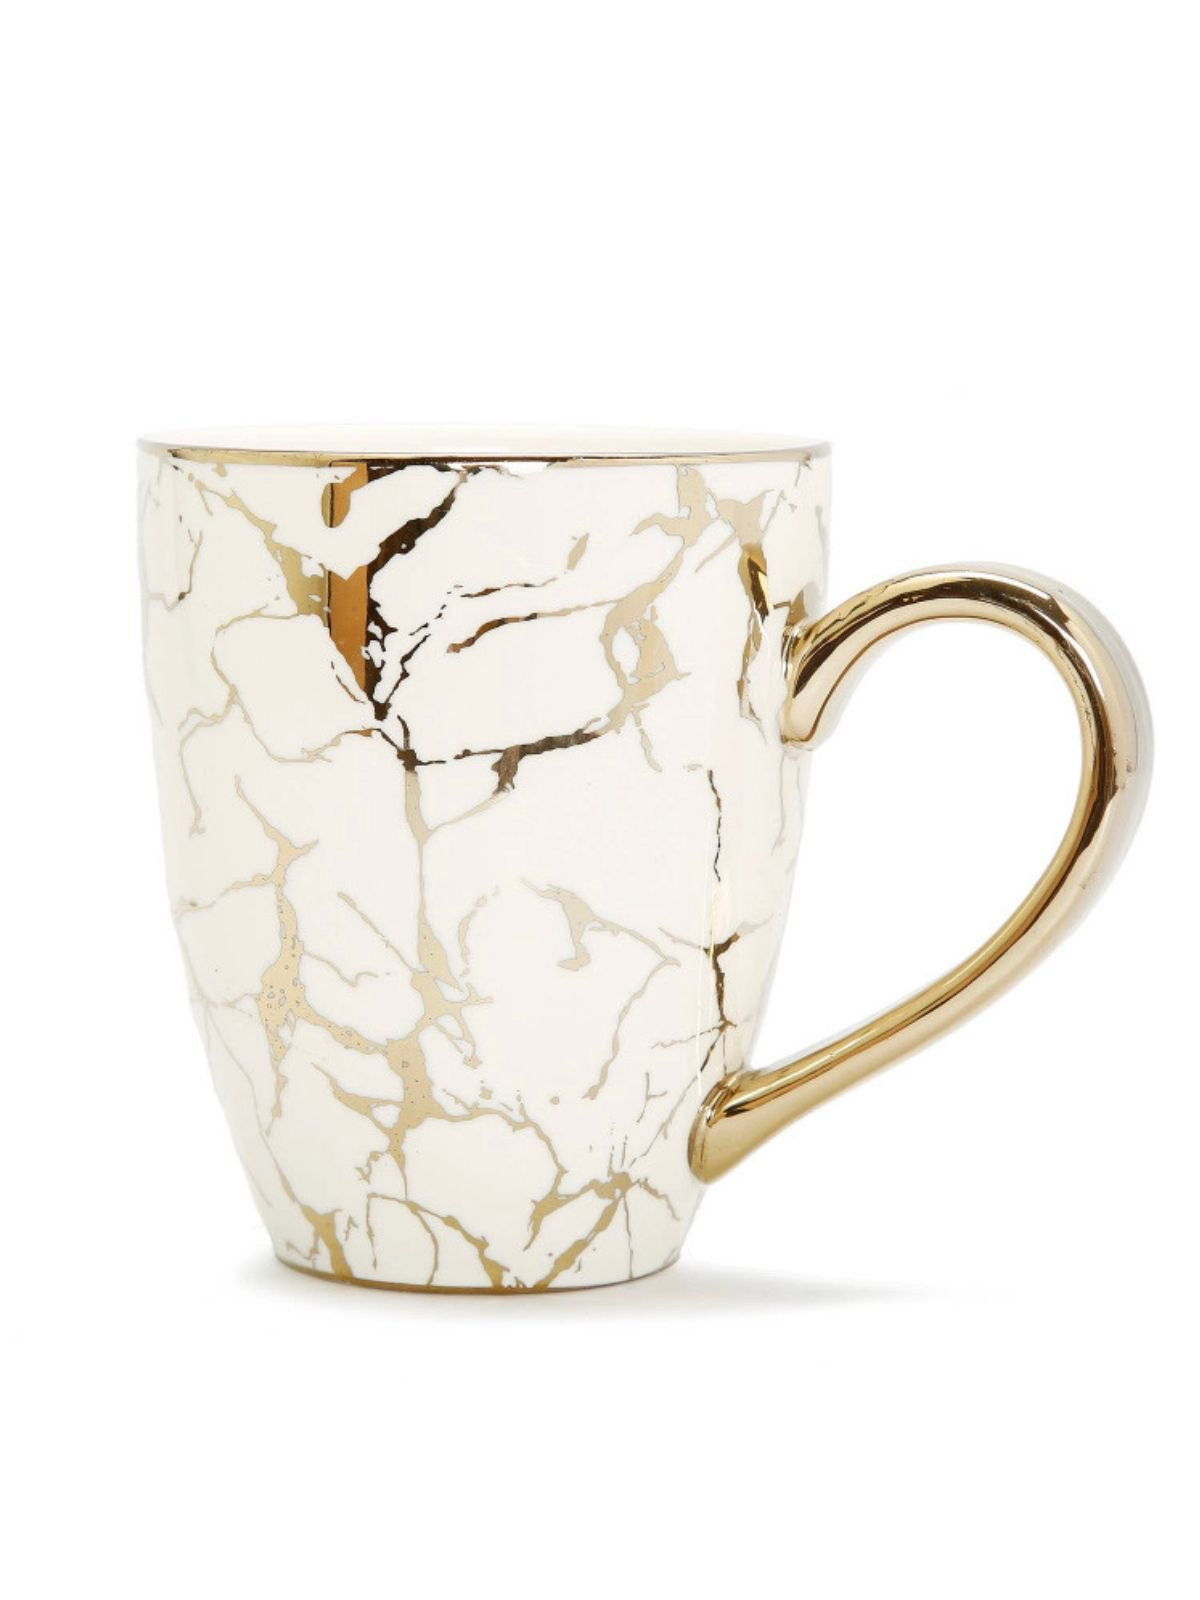 This is a gorgeous white and gold coffee mug with beautiful gold handle. Its gold handle and gold marble look design mug is sure to become a favorite on your coffee station.